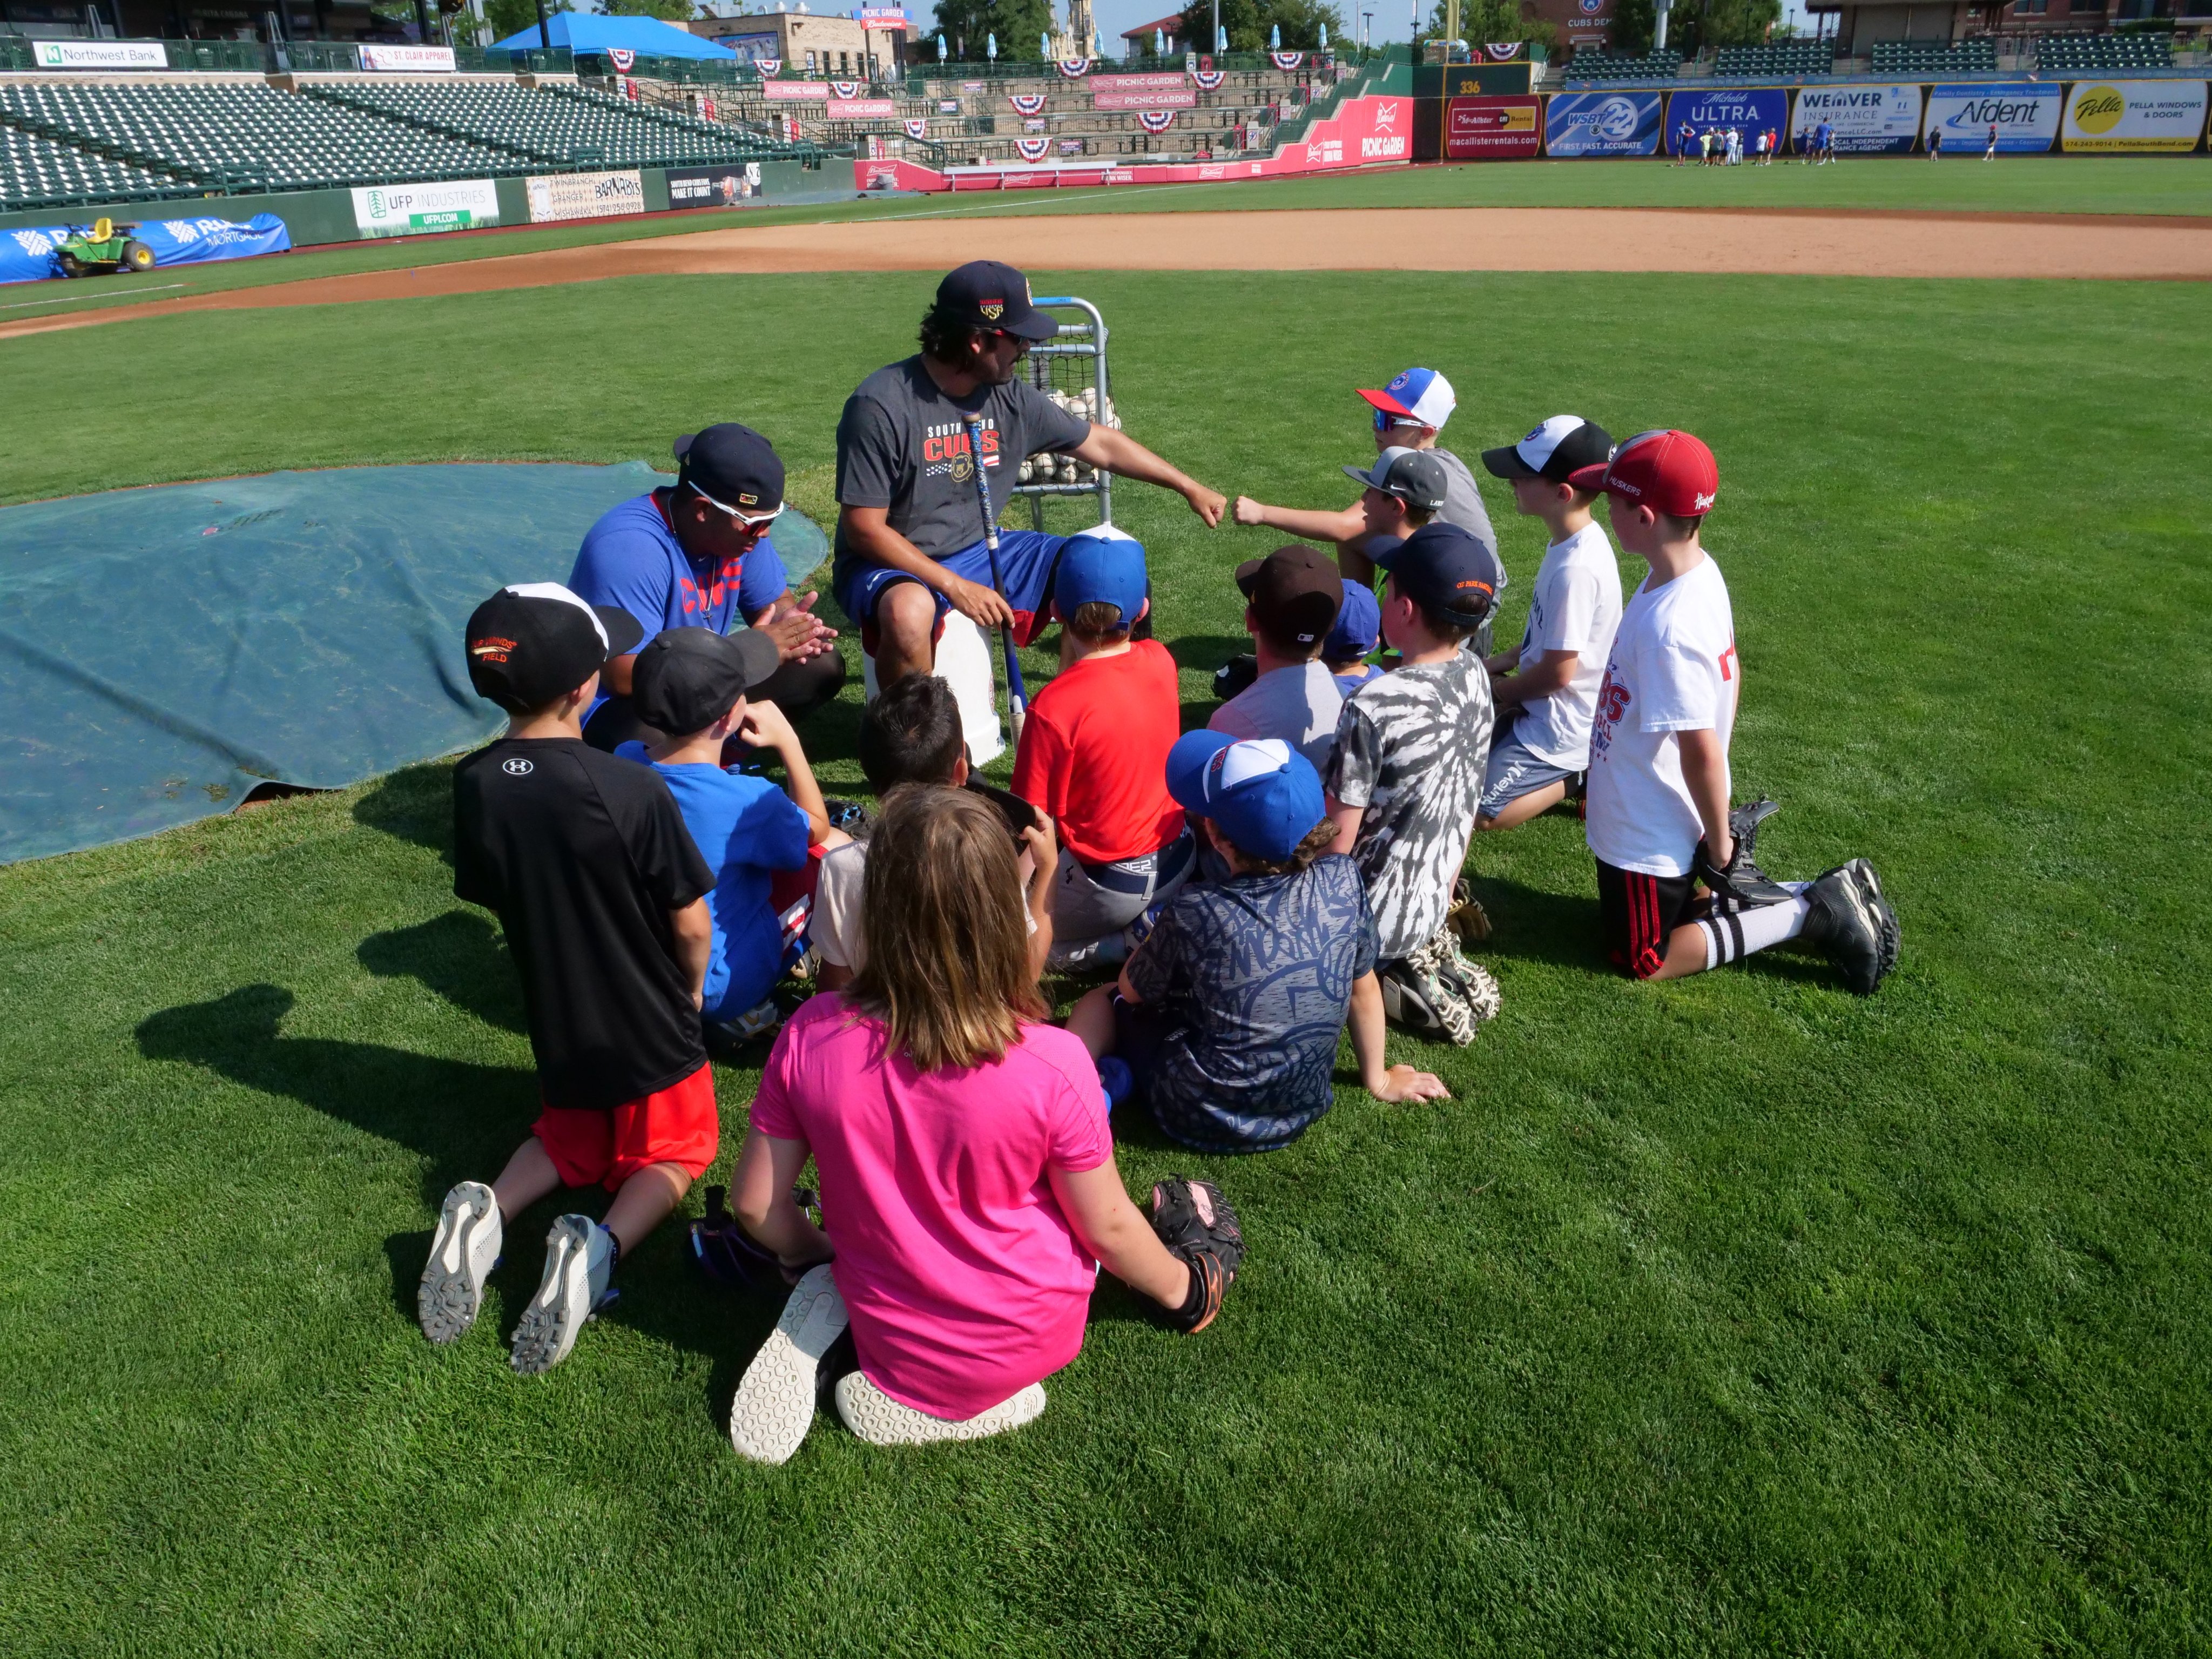 South Bend Cubs on X: The first day of @Meijer Baseball Academy